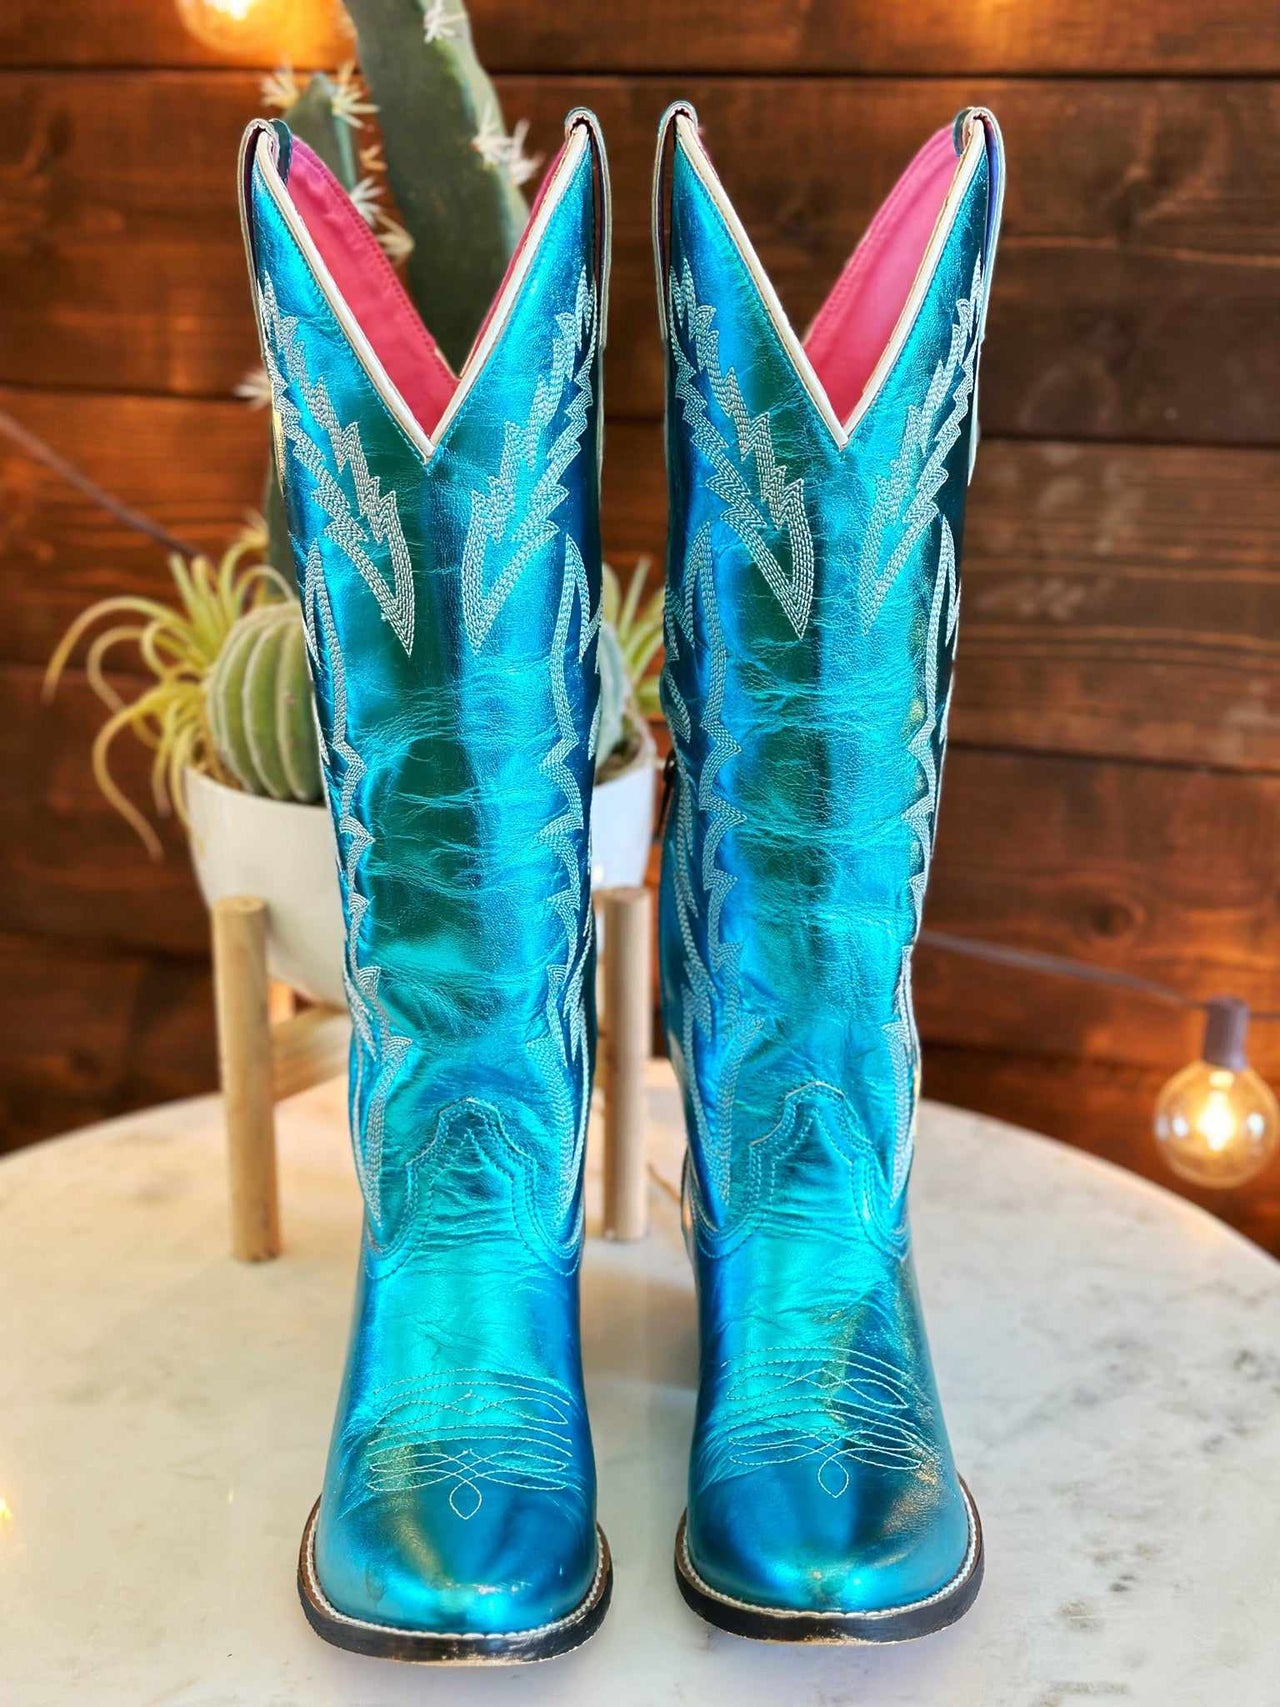 Womens western boots in metallic turquoise.